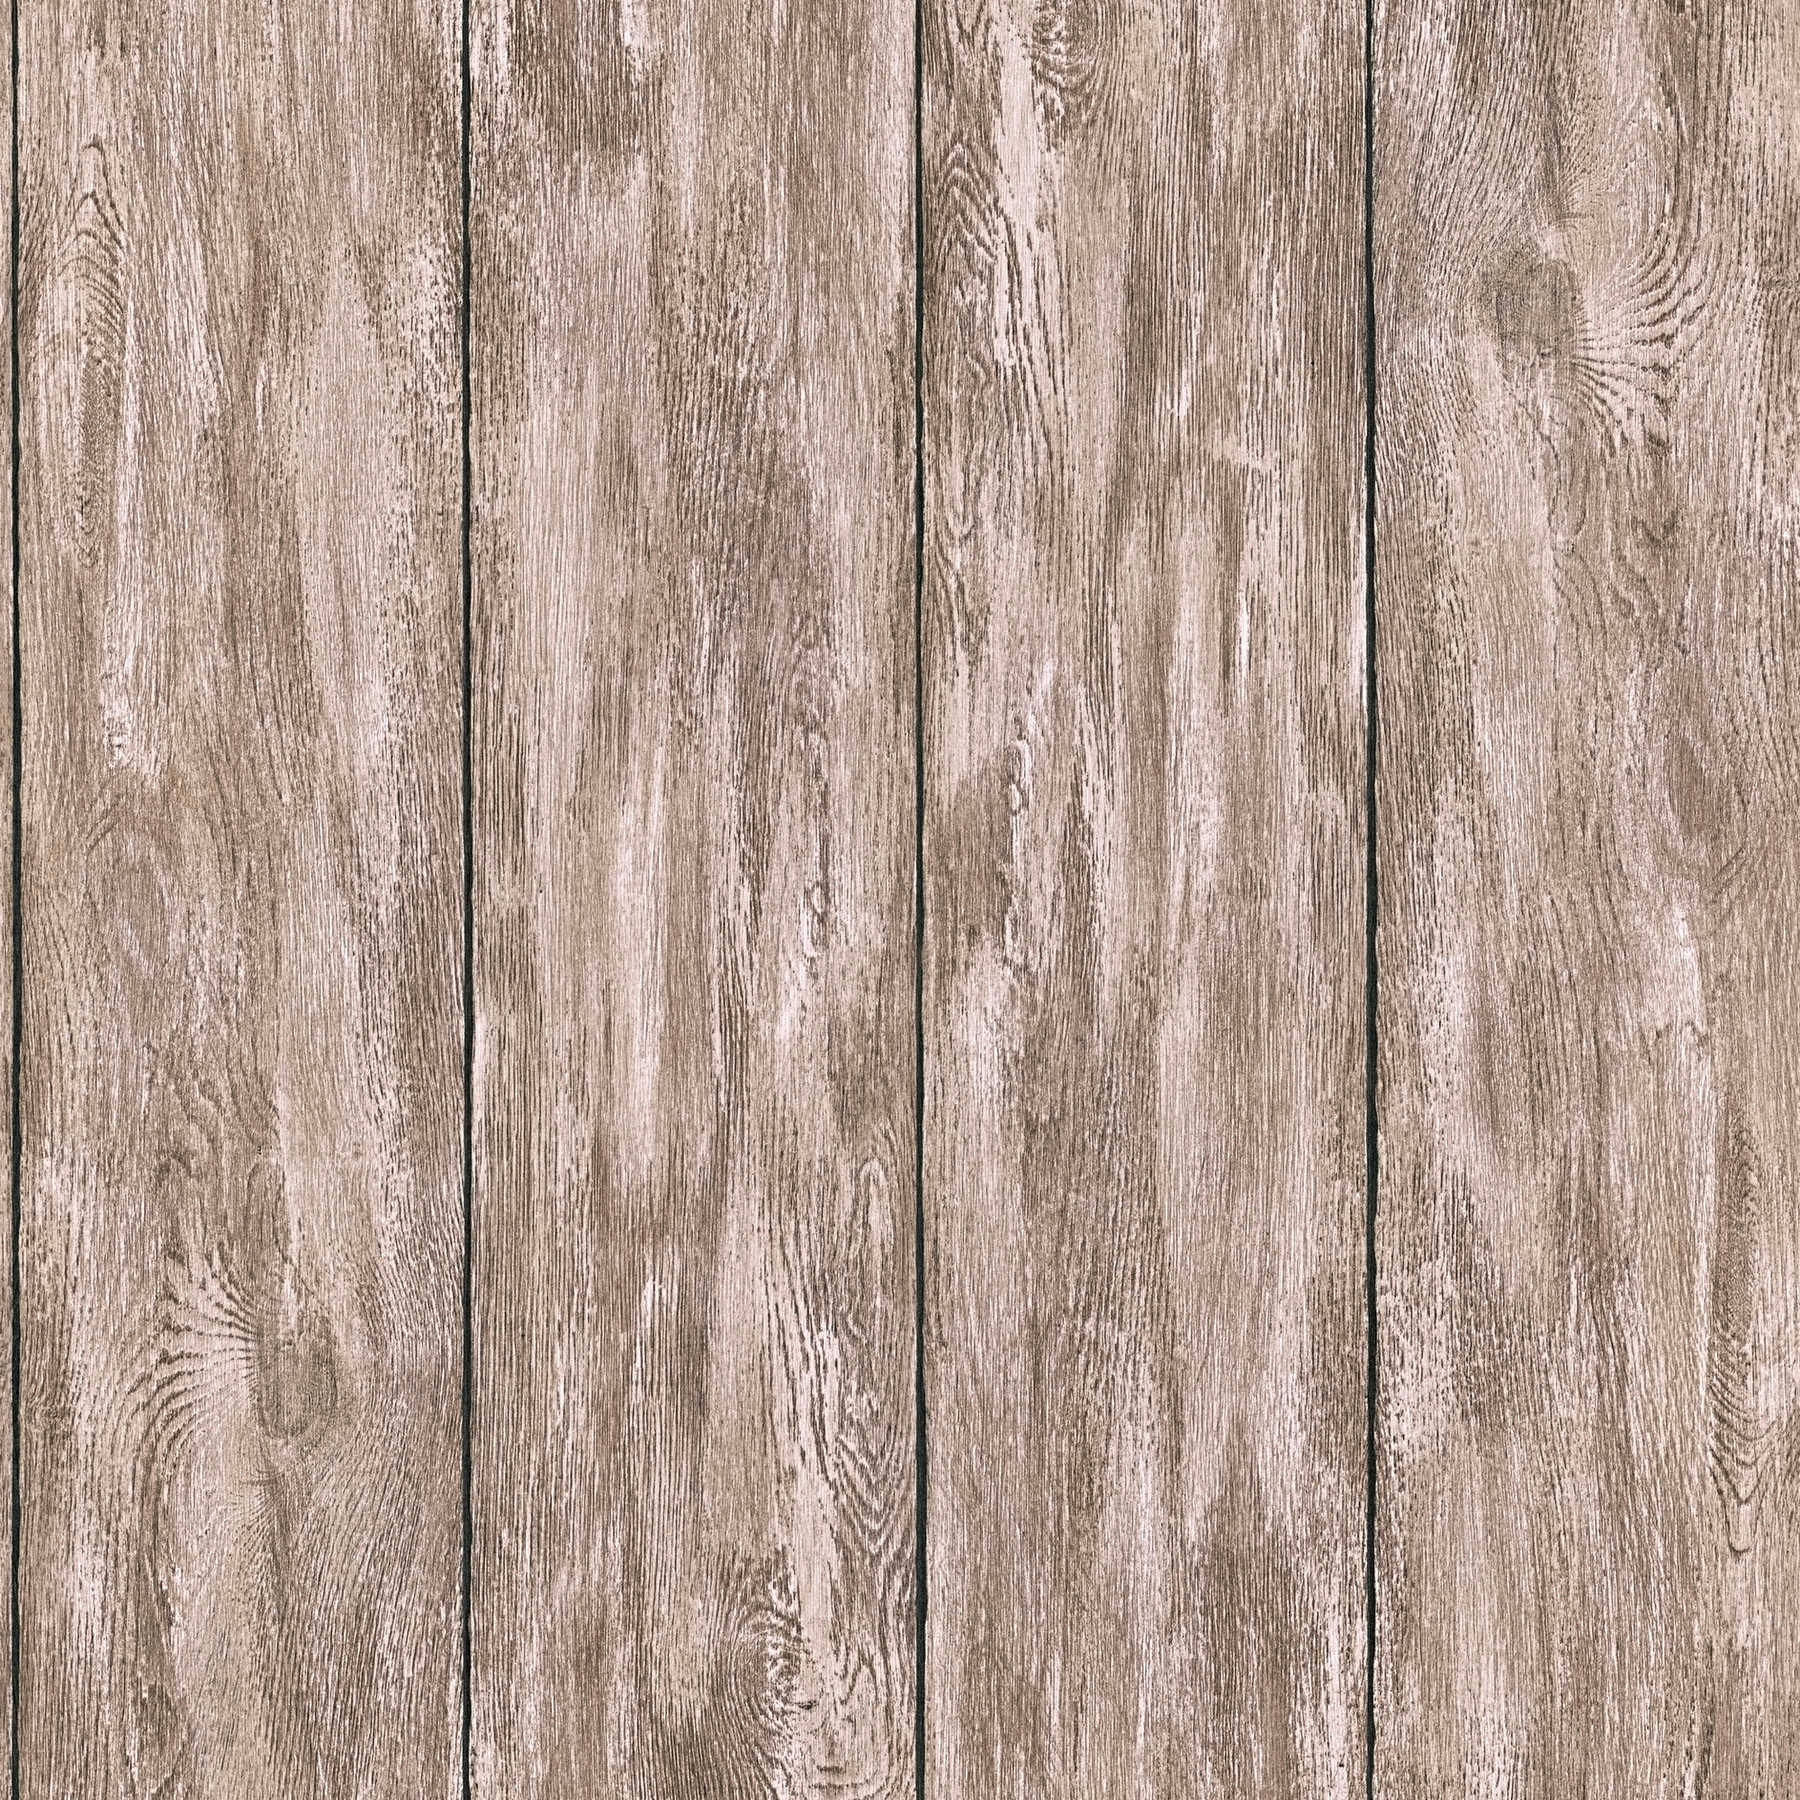 Wallpaper wood look for a cozy country house feeling - brown, beige, grey
